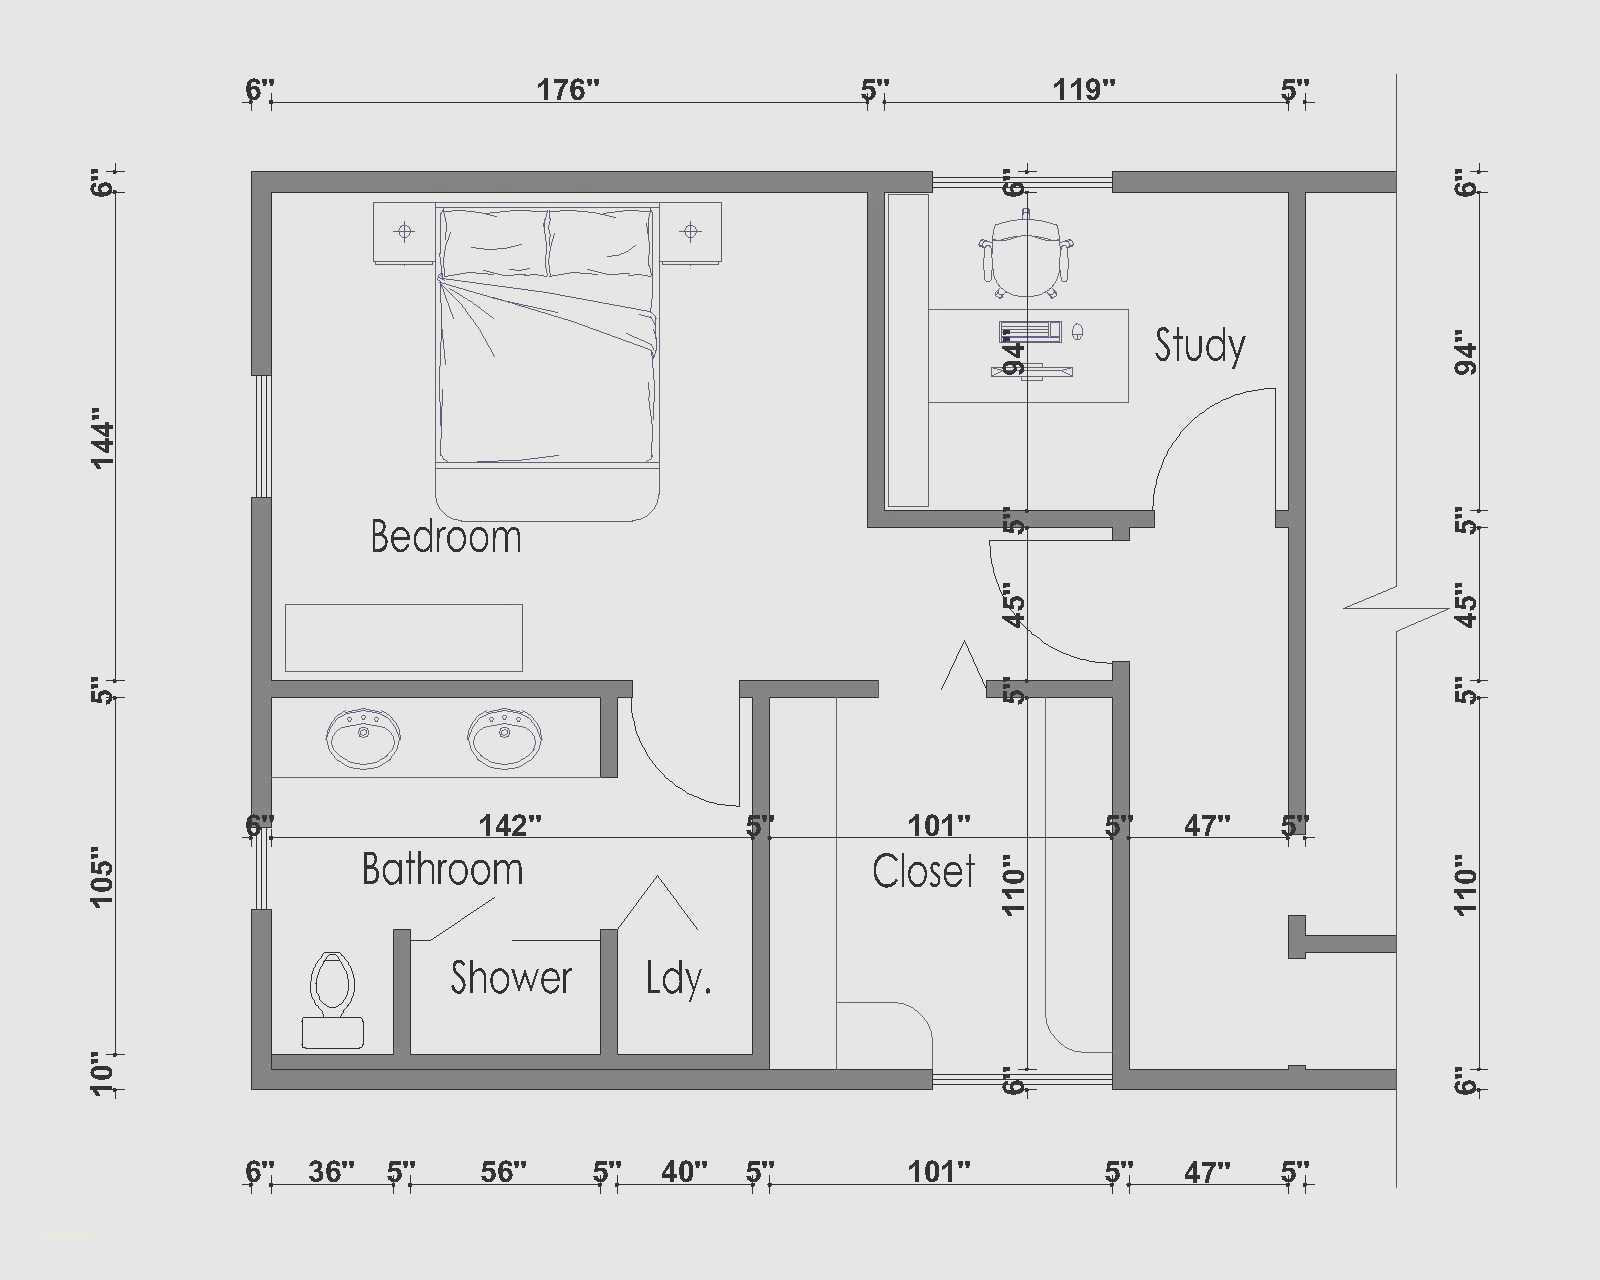 Master Bedroom Floor Plans
 Master Bedroom With Sitting Room Floor Plans Awesome Plan